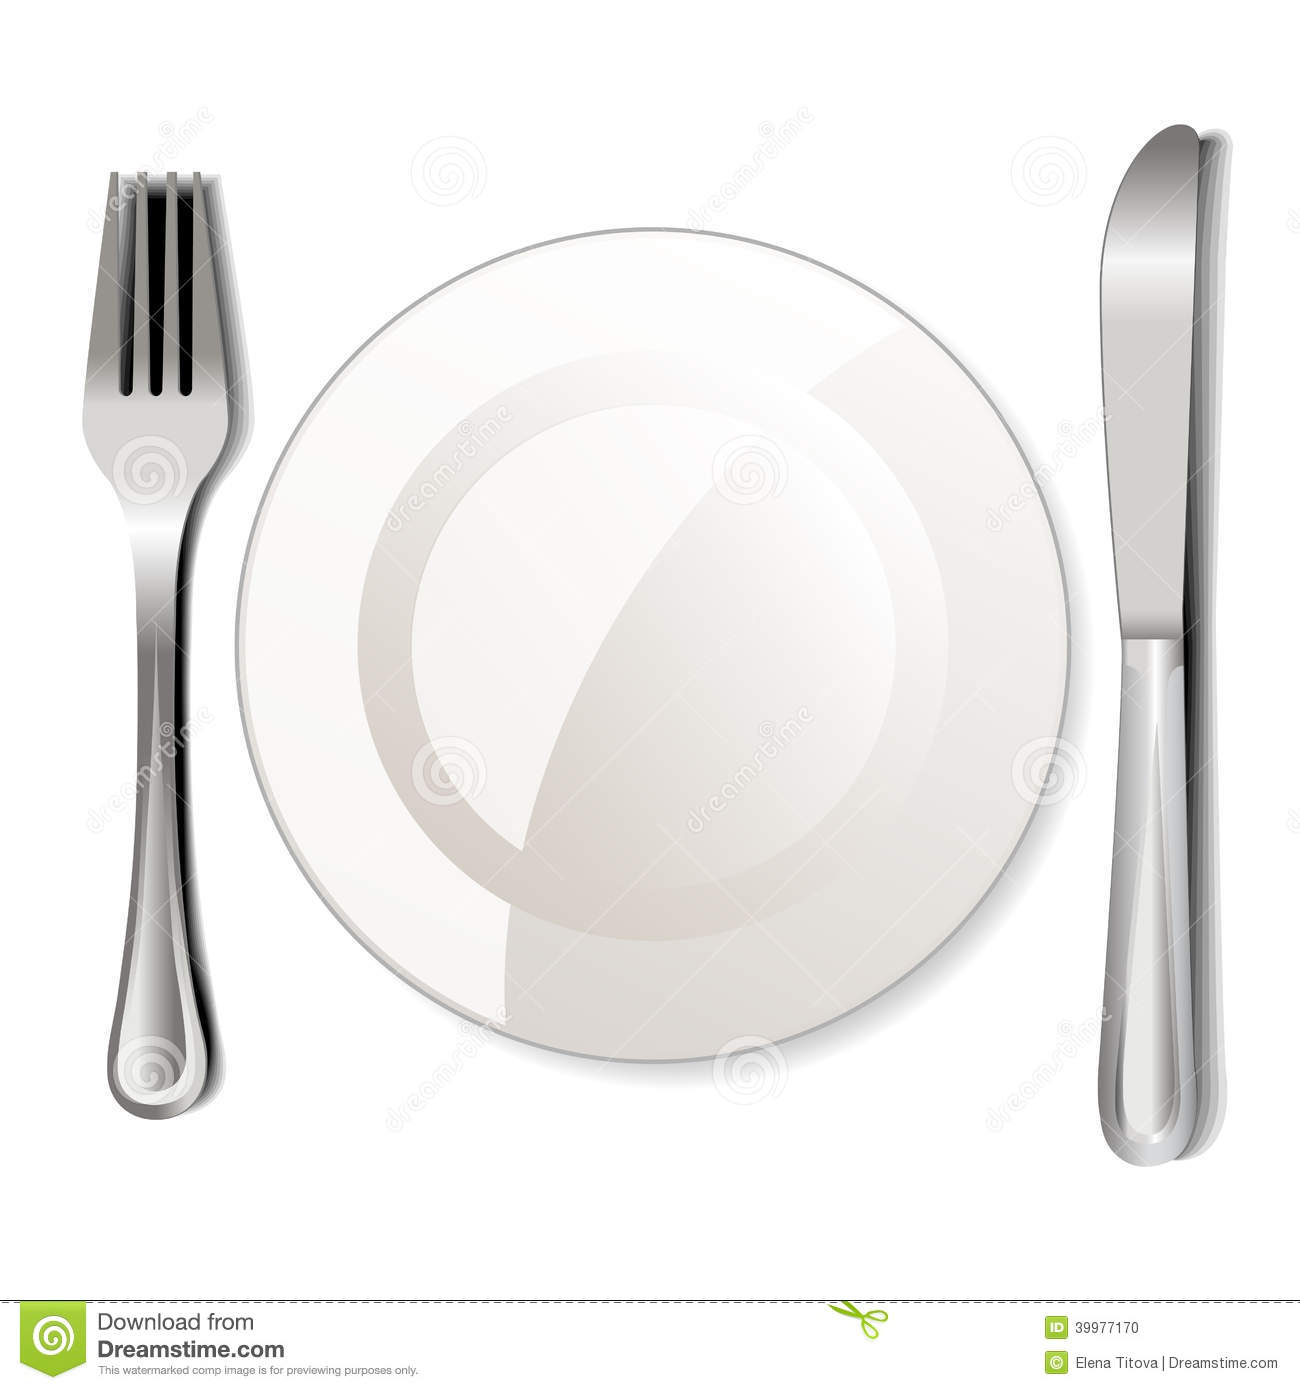 Dinner Plate Knife And Fork On A White Background Mr No Pr No 0 84 0